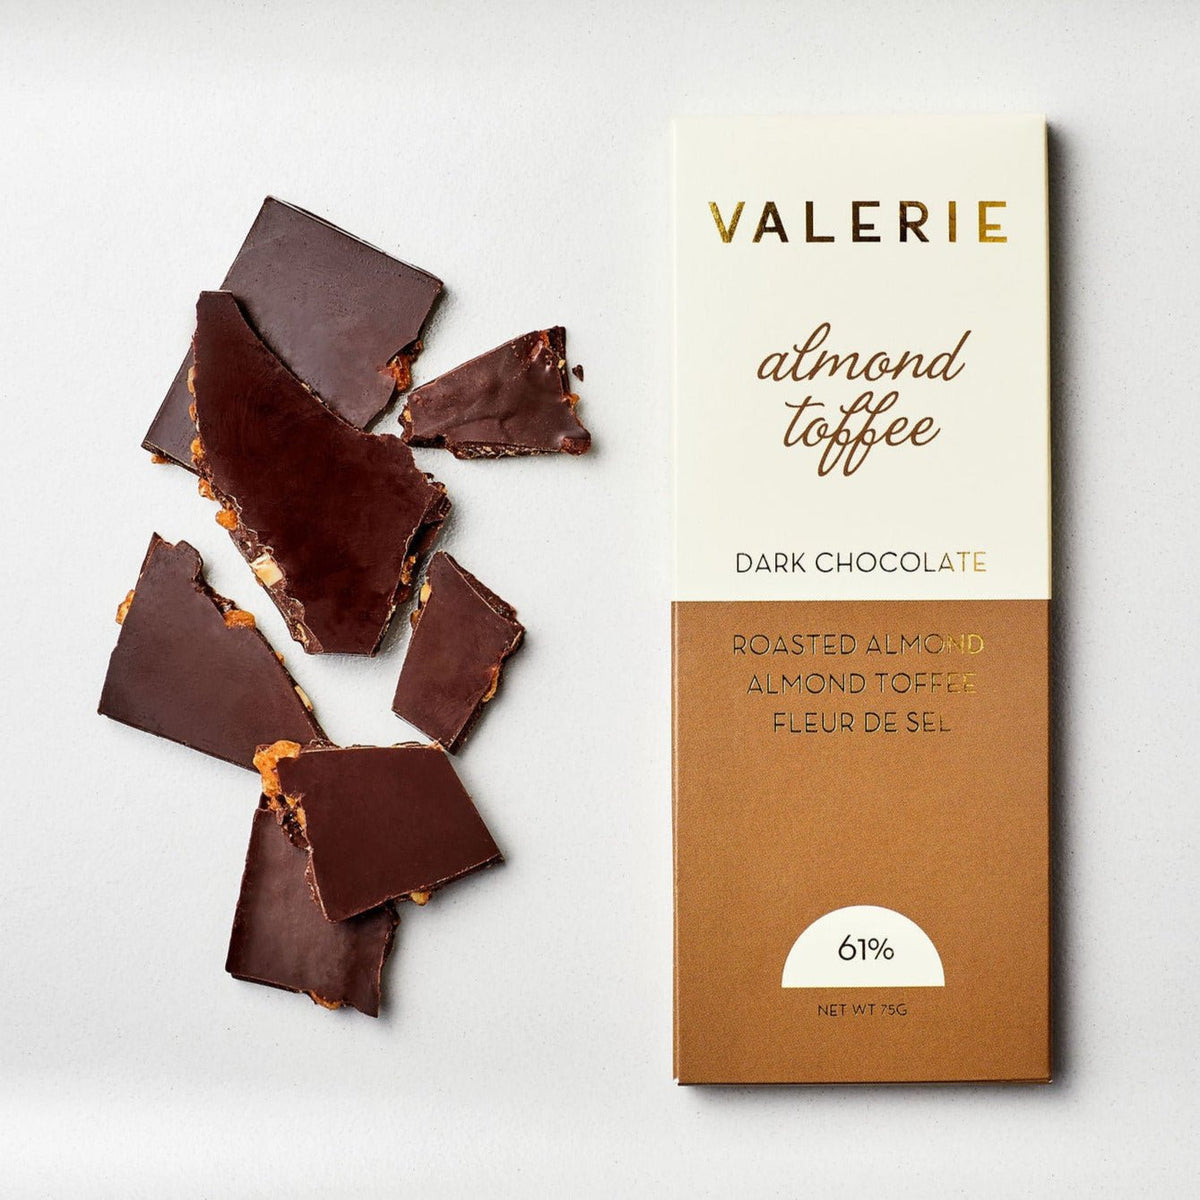 Valerie&#39;s almond toffee dark chocolate with Fleur de Sel is shown. Beside the packaging are broken pieces of the chocolate revealing almond toffee inside. Net weight is 75 grams and 61% cocoa.